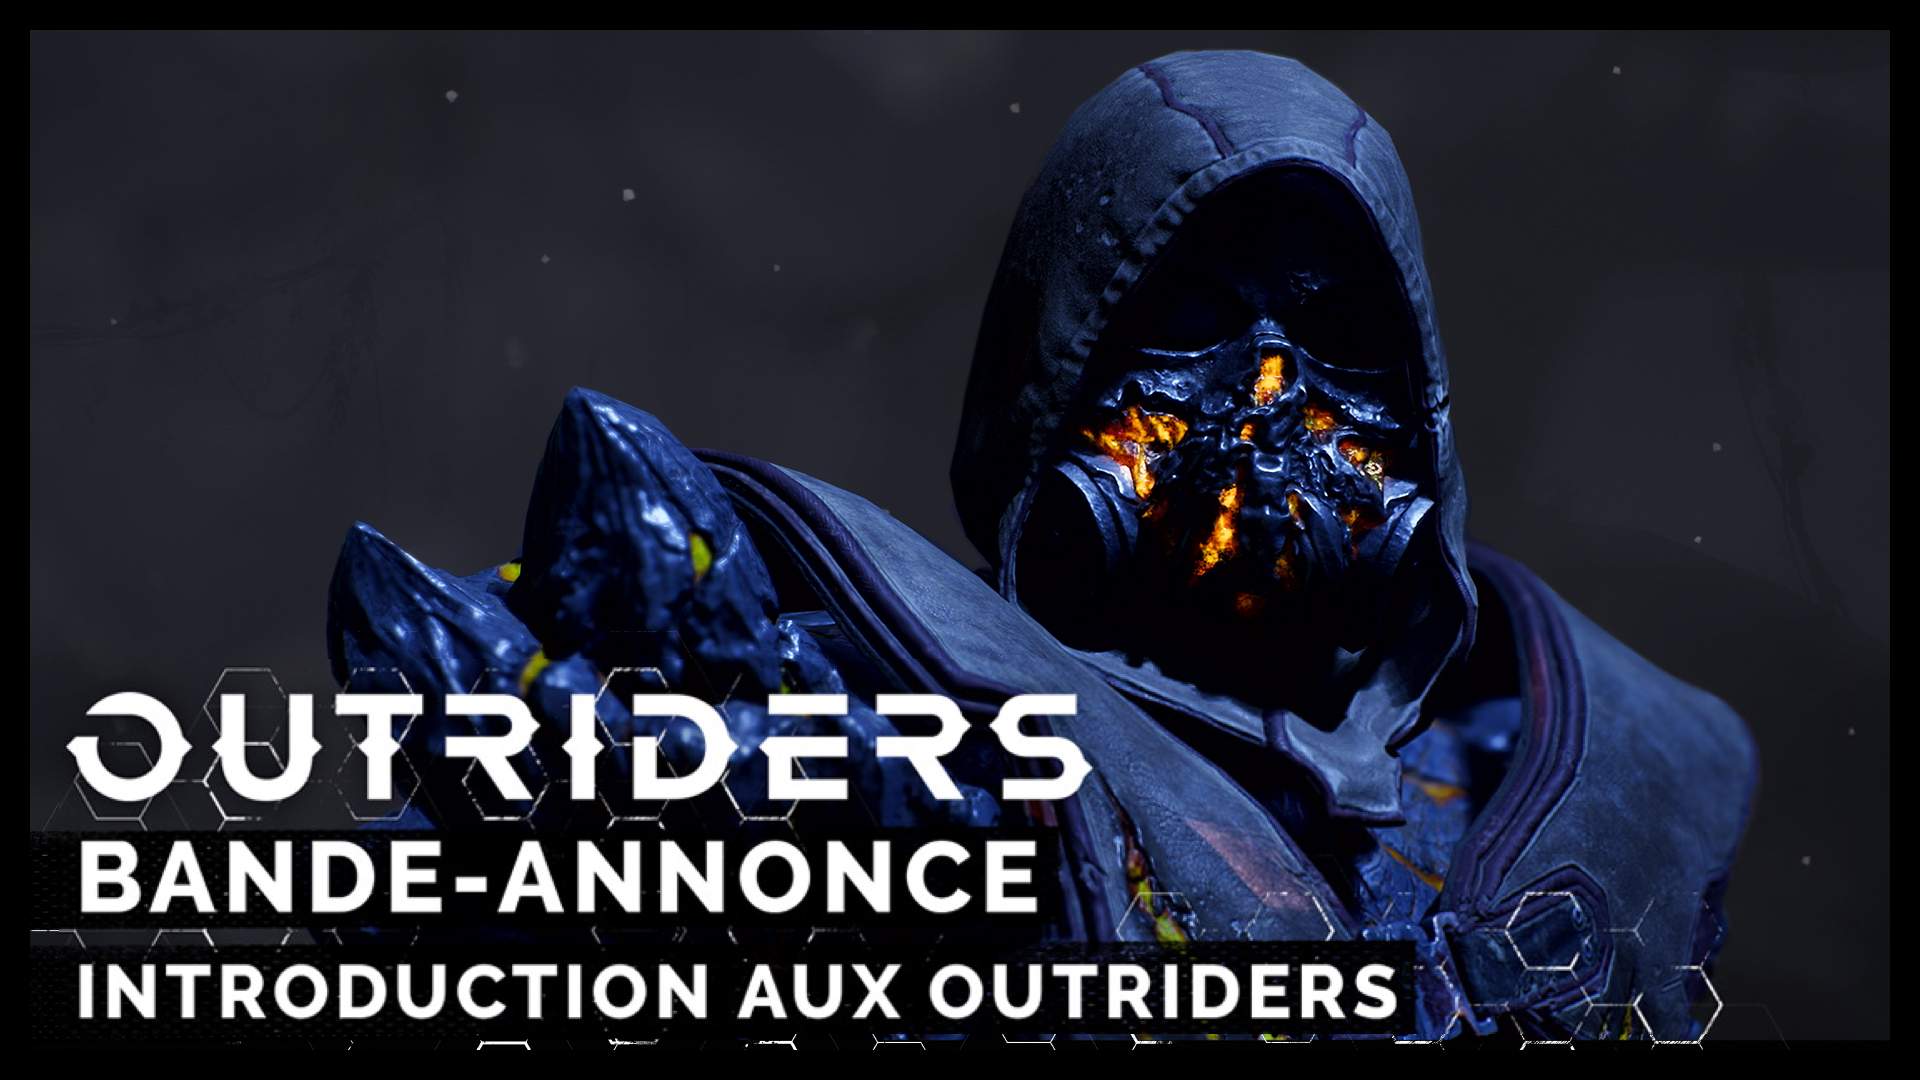 INTRODUCTION AUX OUTRIDERS